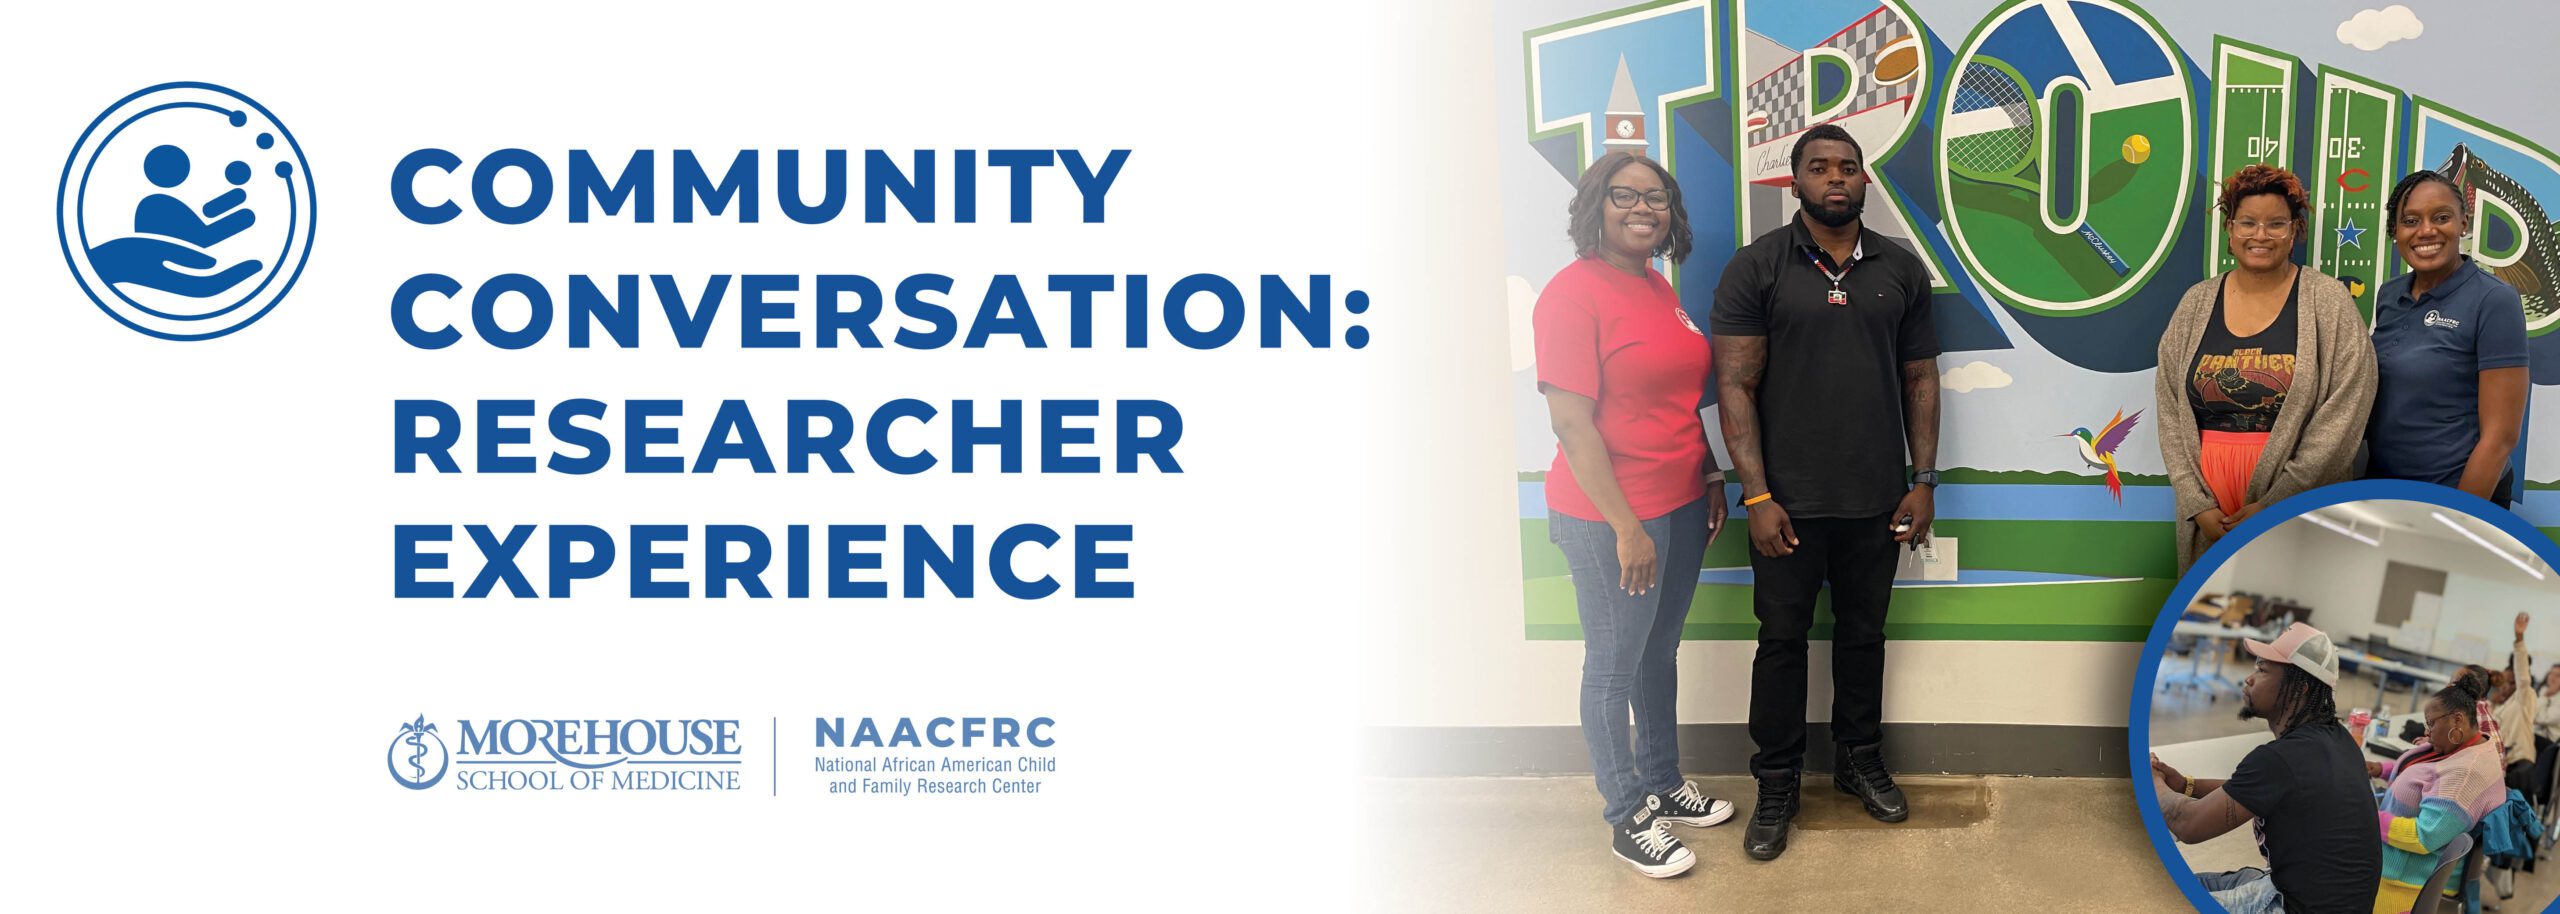 NAACFRC logo in the top left corner in the color blue Community Conversation: Research Experience on the right of the logo in blue font in capital letters. On the left hand side there is an image of NAACFRC team members and an 2023-2024 Emerging Scholar cohort member. Team members from left to right Tandeca Gordon, Ed, Associate Director; Jude Louissaint, Community Health Workers/Research Assistant; Amber B. Sansbury, M.Ed, BA, 2024 Emerging Scholar cohort member; Dr. Latrice Rollins, PhD, MSW, Director & Principal investigator